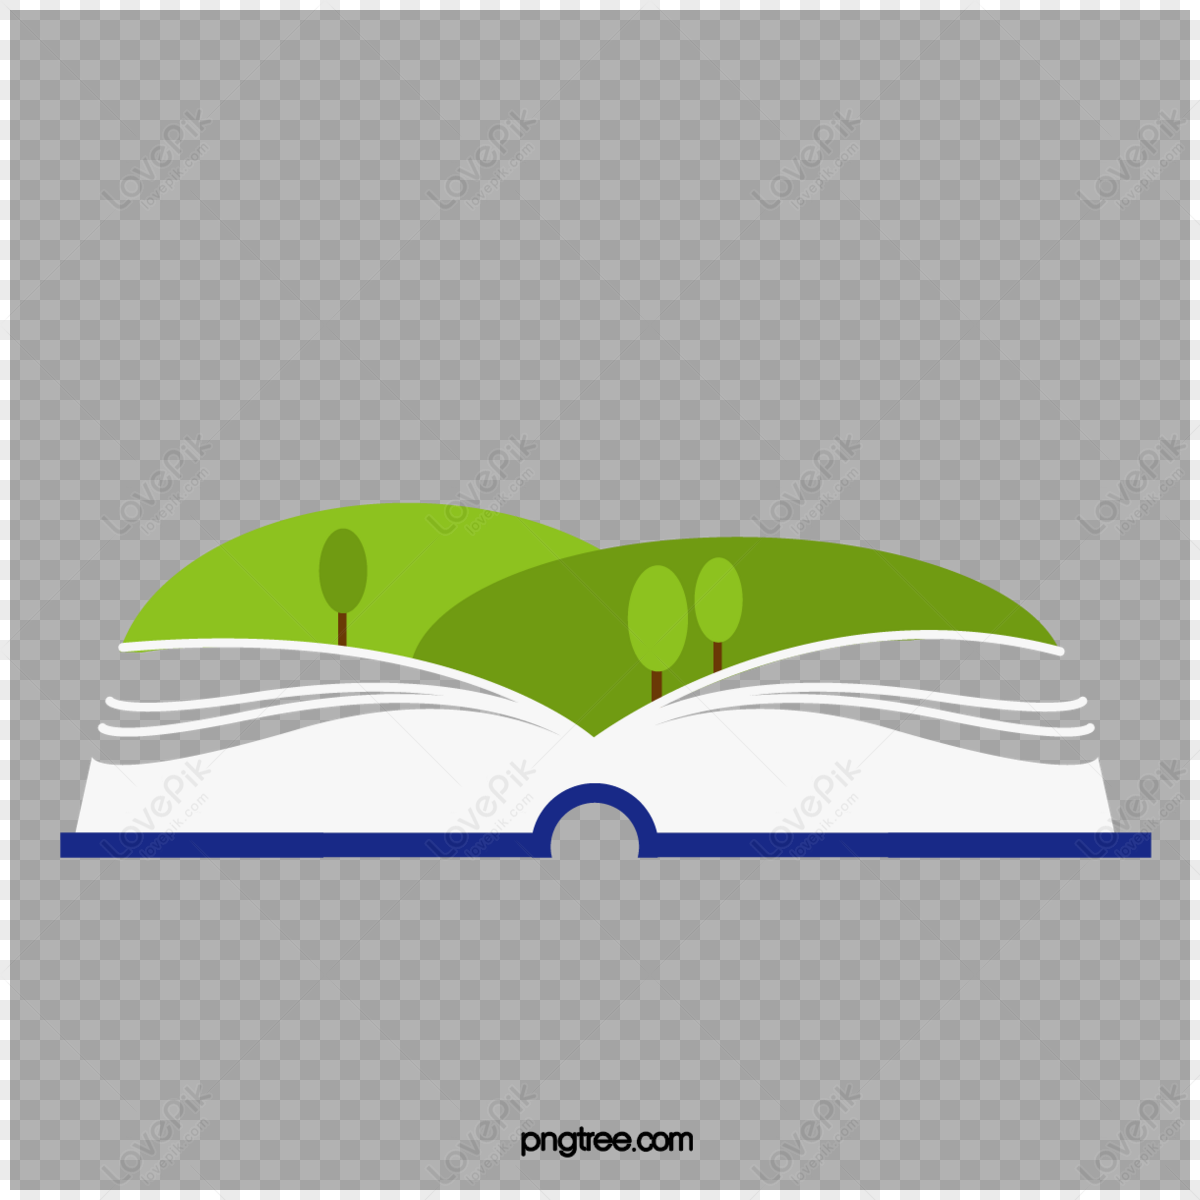 Book books cartoon stationery,color stationery,student supplies,office supplies png transparent background